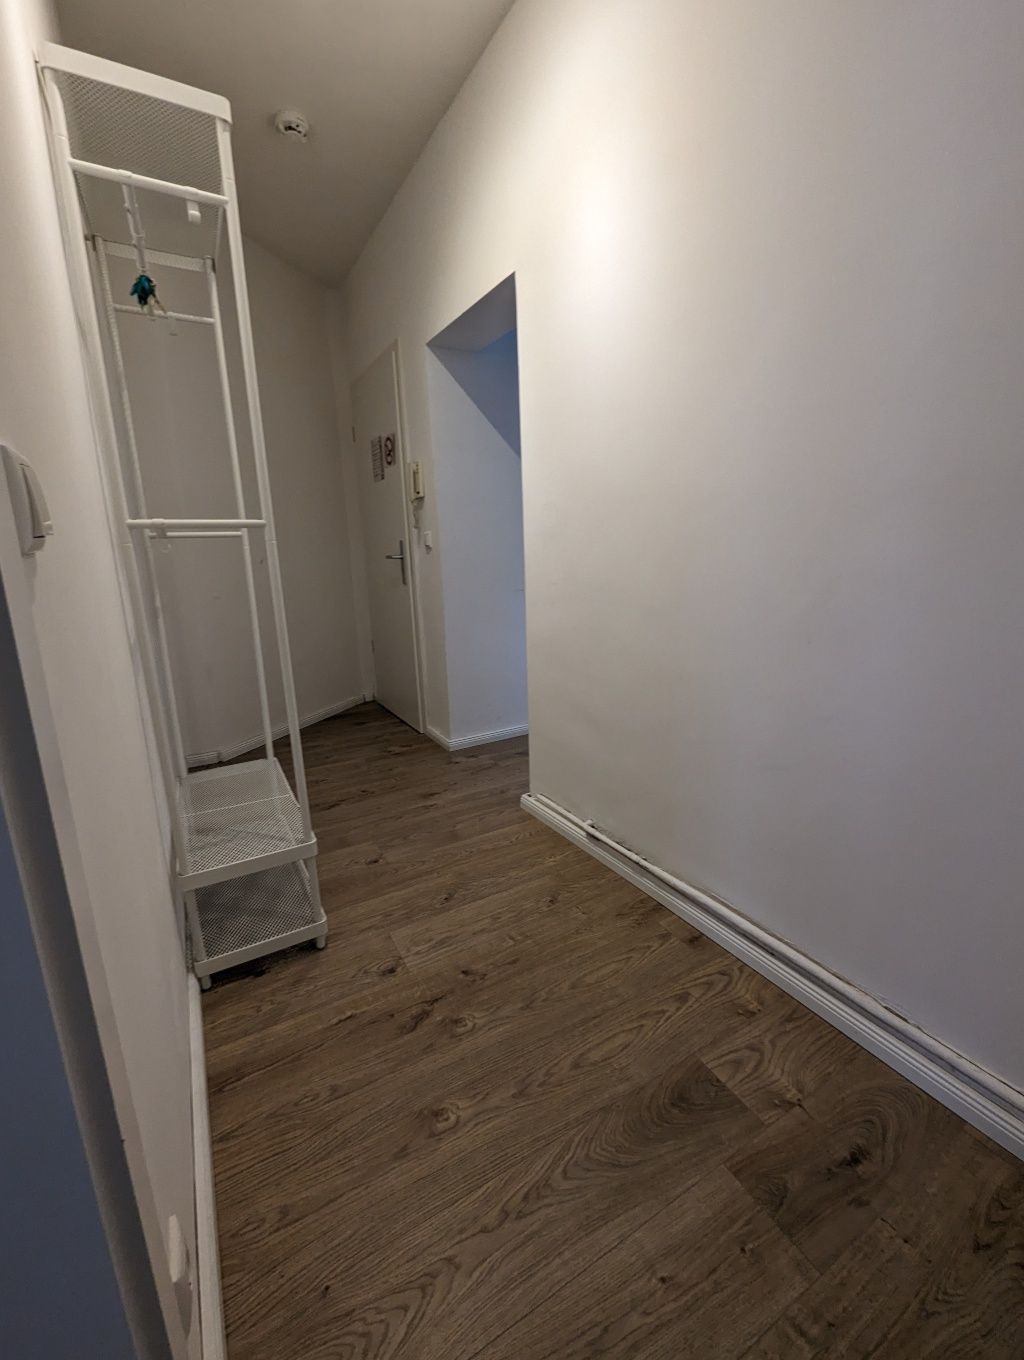 2-room apartment in renovated old building